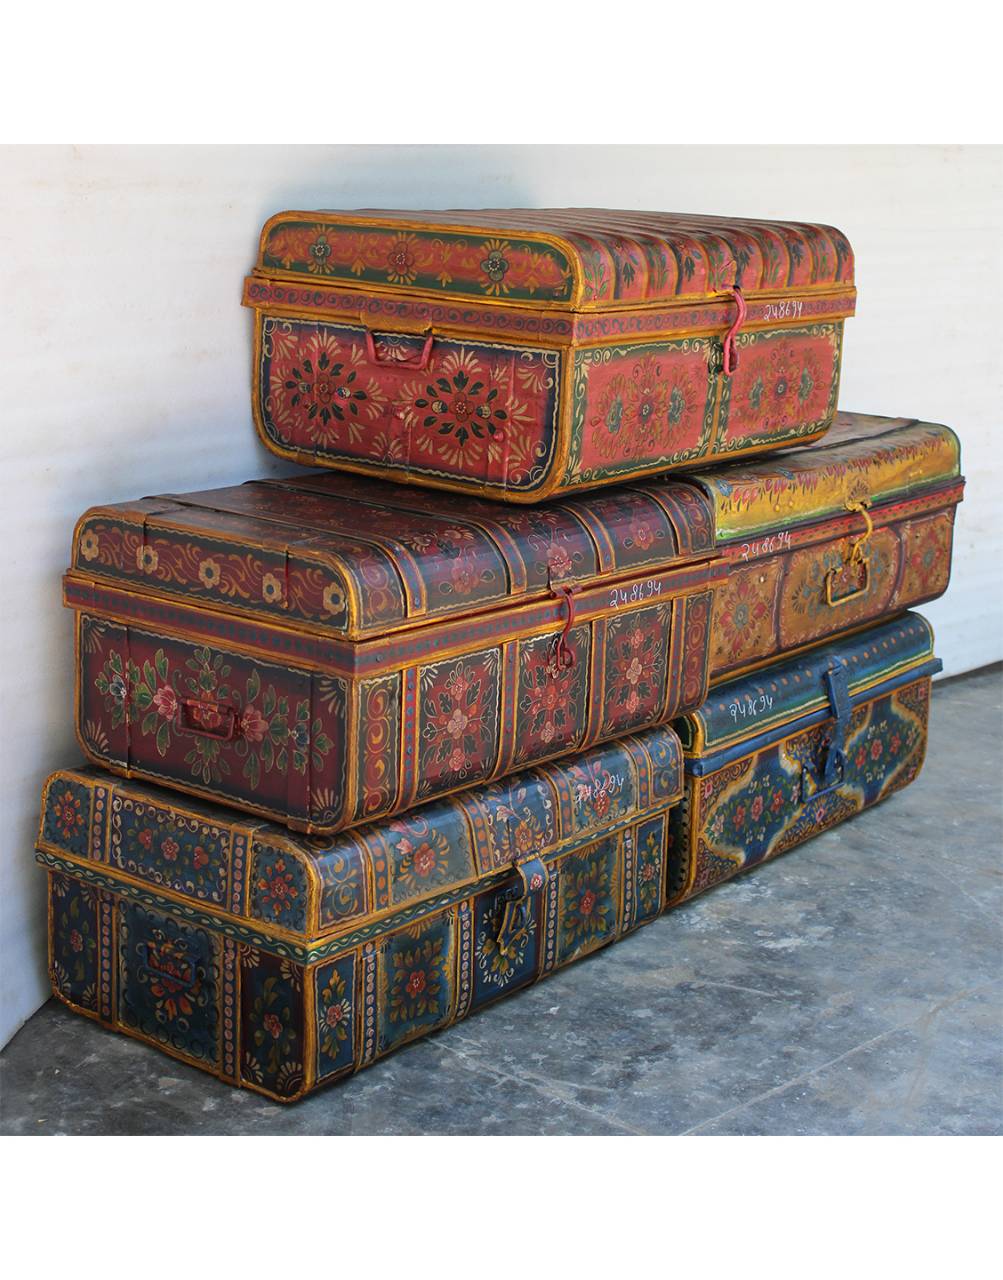 Vintage iron trunk Decorative storage unit Hand-painted design Vintage charm Coffee table decor Bedroom accent piece Timeless home decor Imperfections are beauty Handcrafted charm Home decor trend Vintage furniture Unique home accents Rustic decor Artisanal craftsmanship Iron trunk decoration tesu